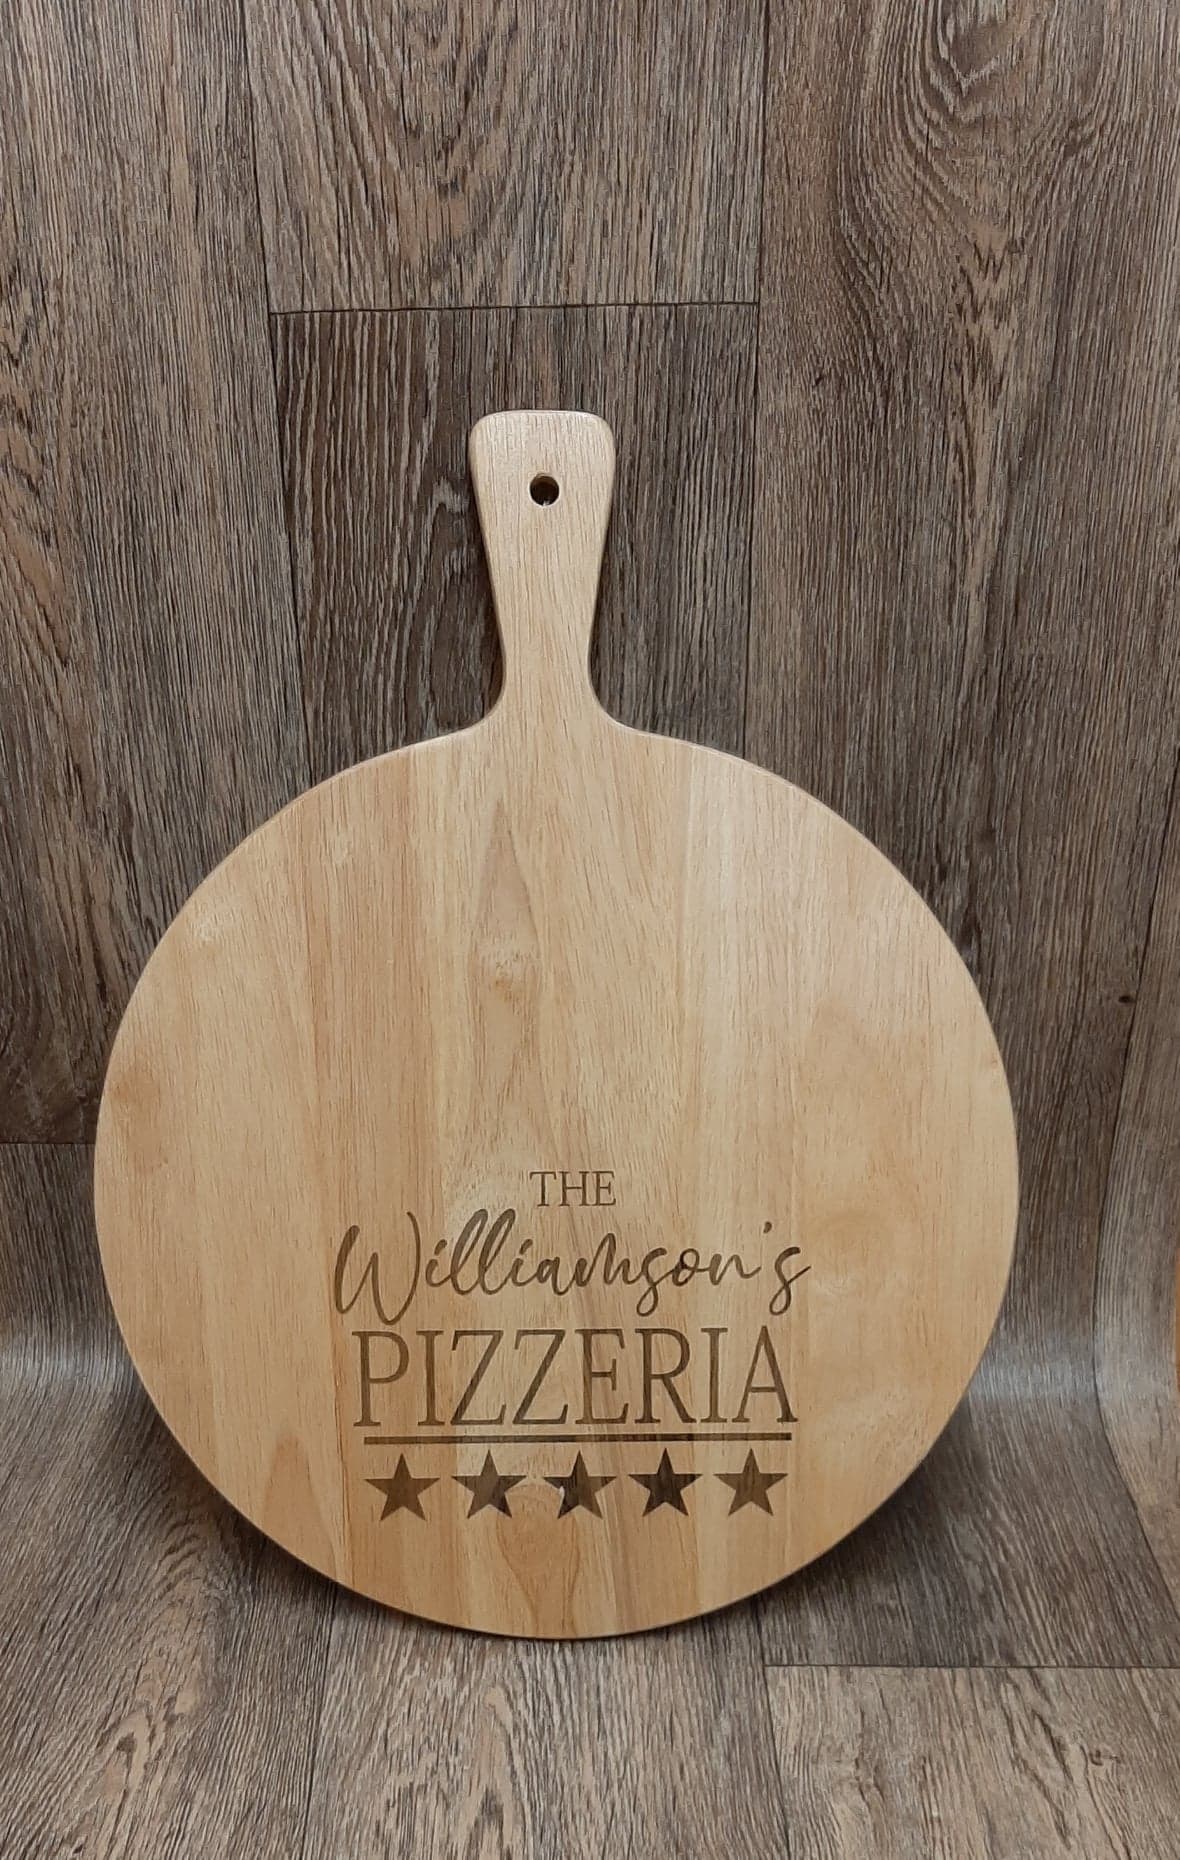 Pizza board etched